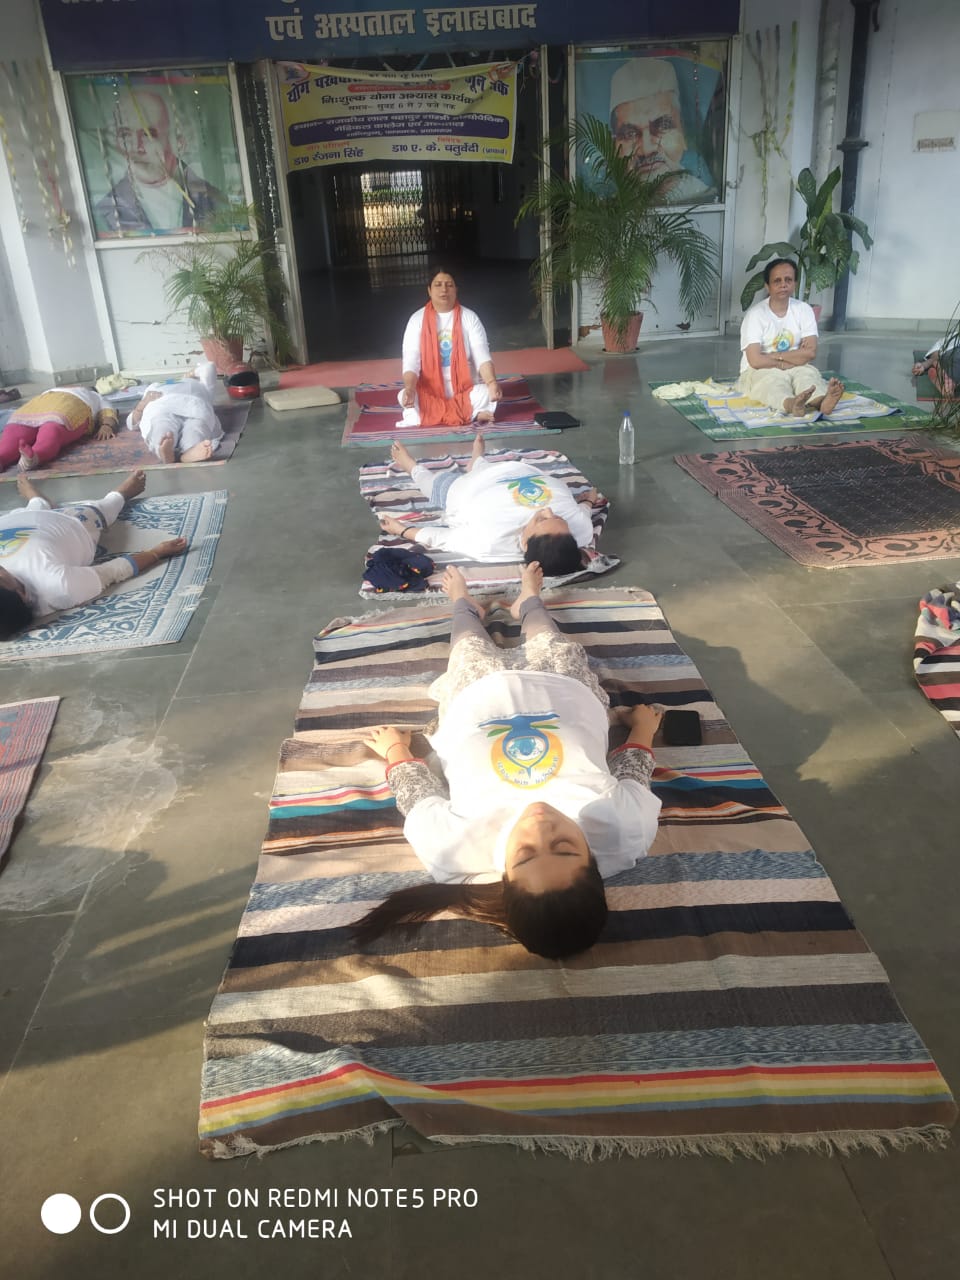 <h1><strong>5th International Yoga Day Celebration on 21 June 2019 </strong></h1>